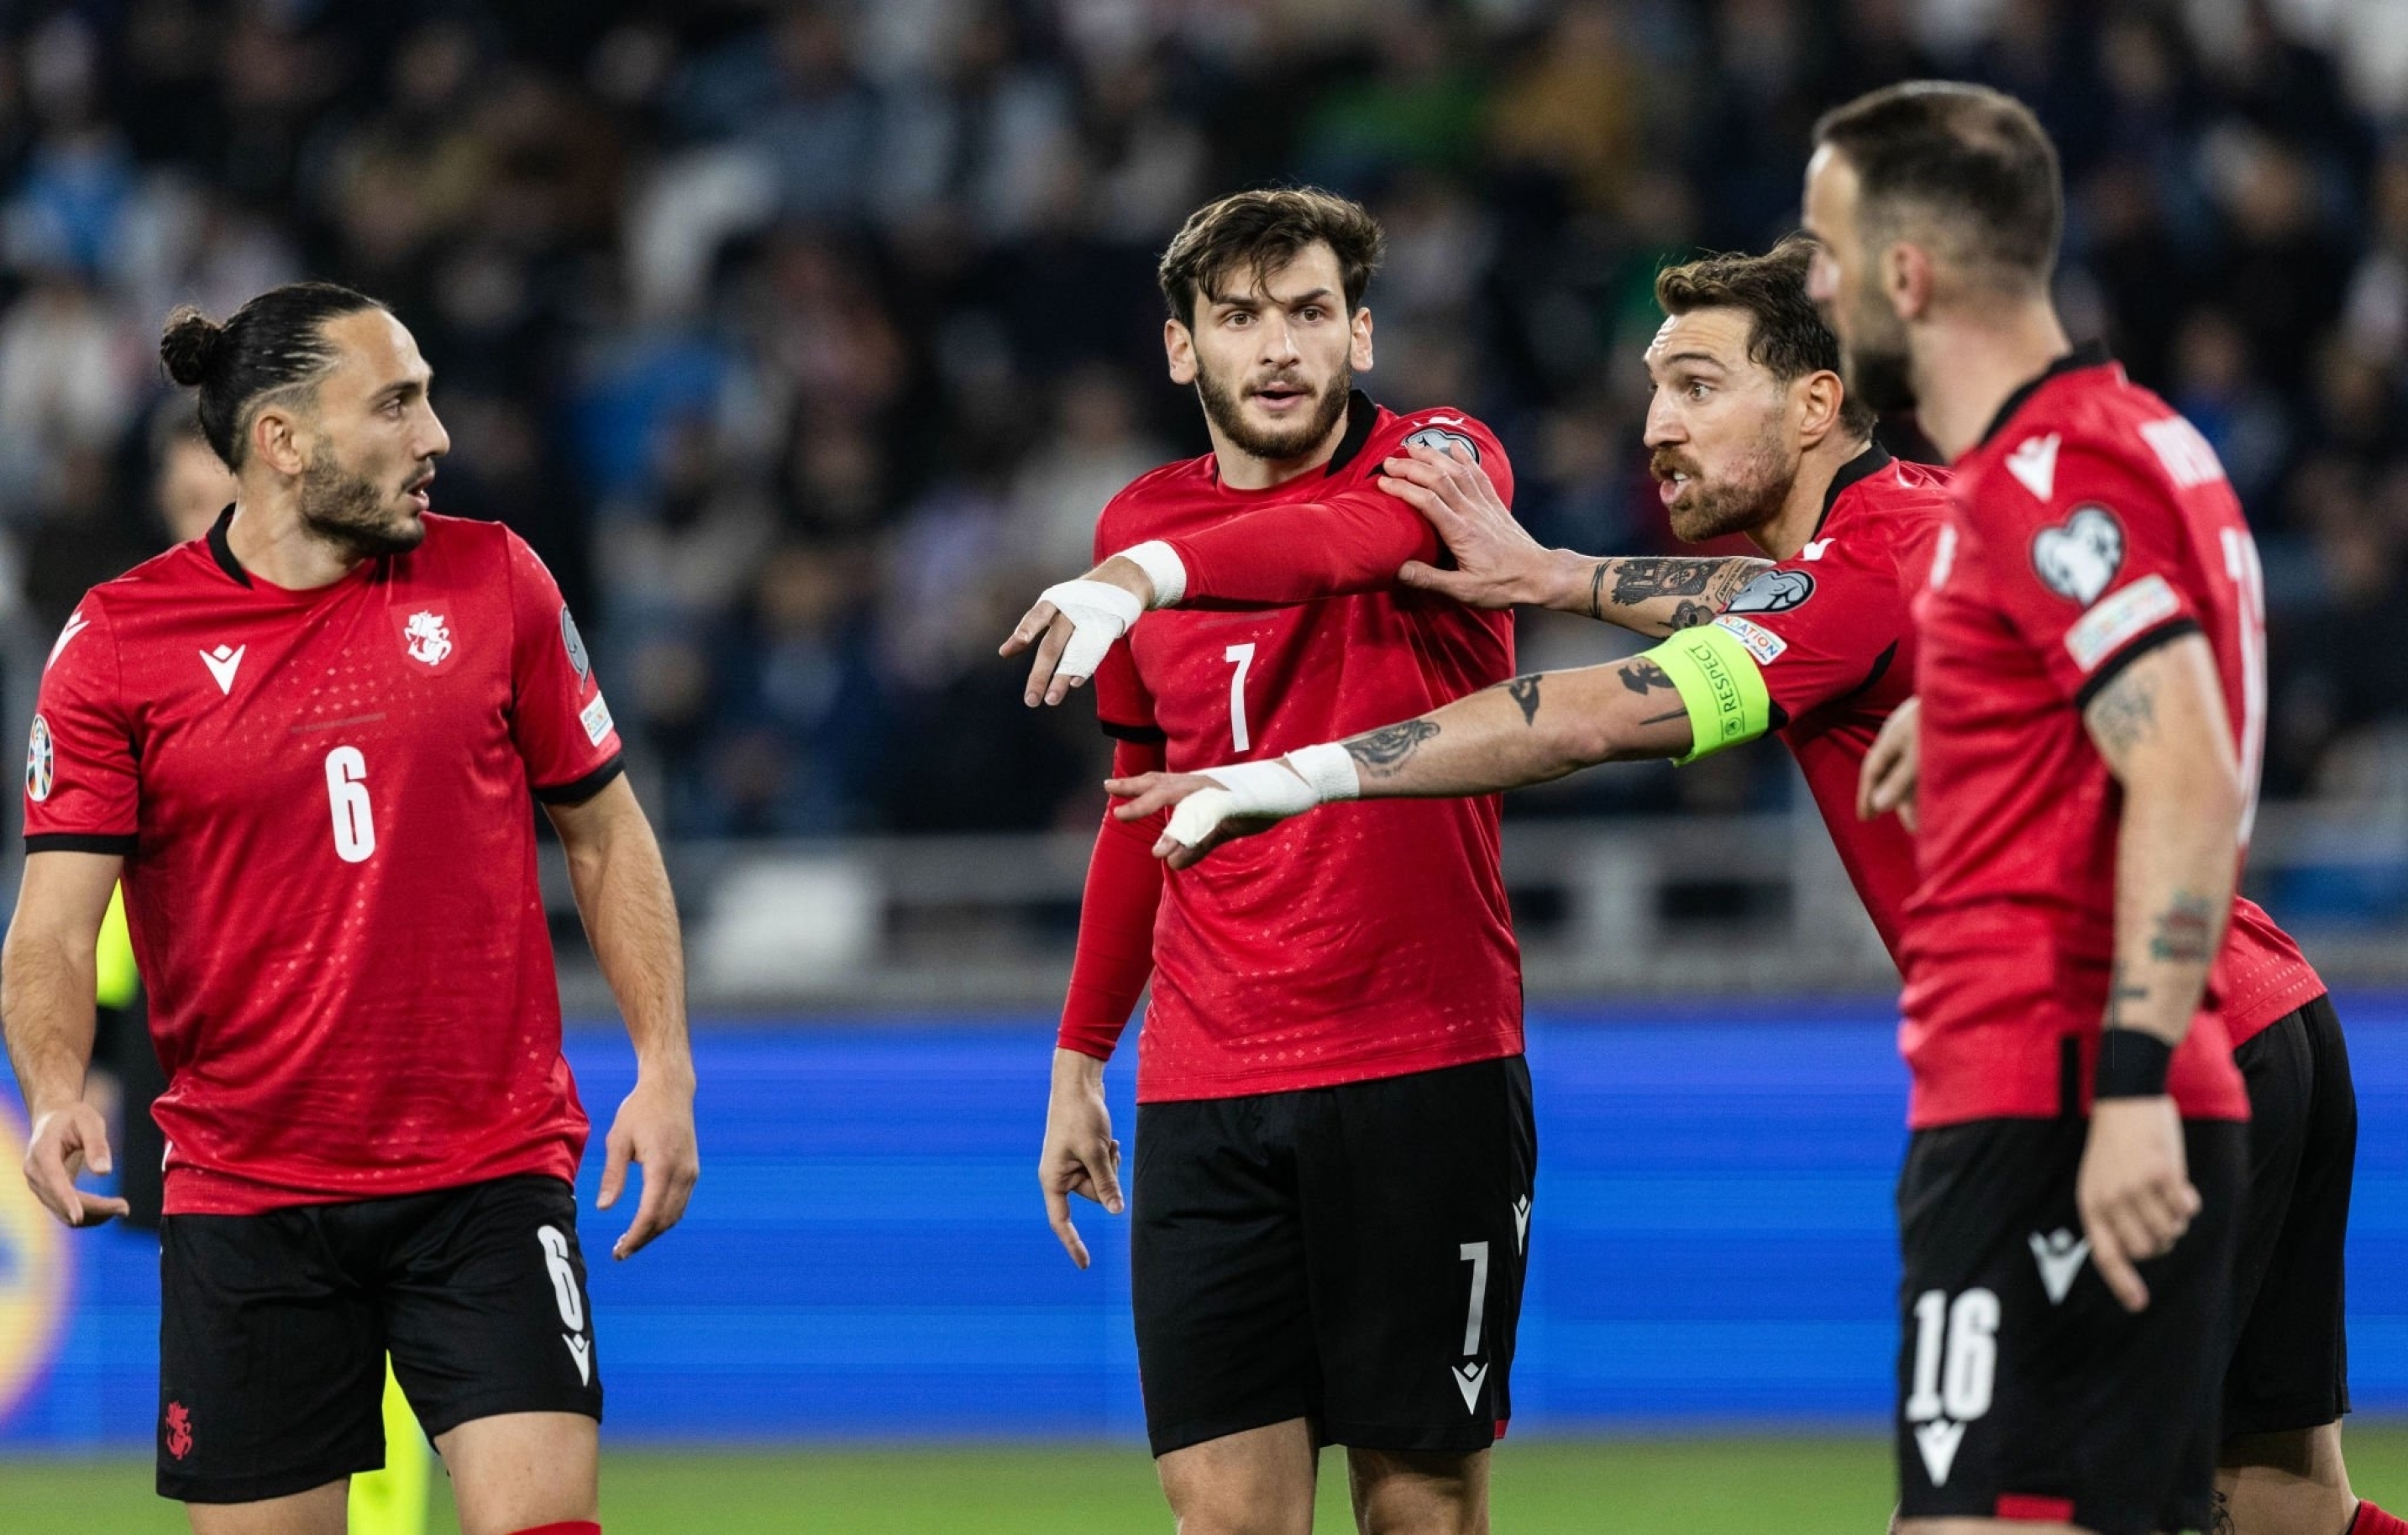 Spain vs Georgia - ESP vs GEO - La Roja are determined to end Euro Qualifiers campaign at the top of the Group A table with a comfortable win